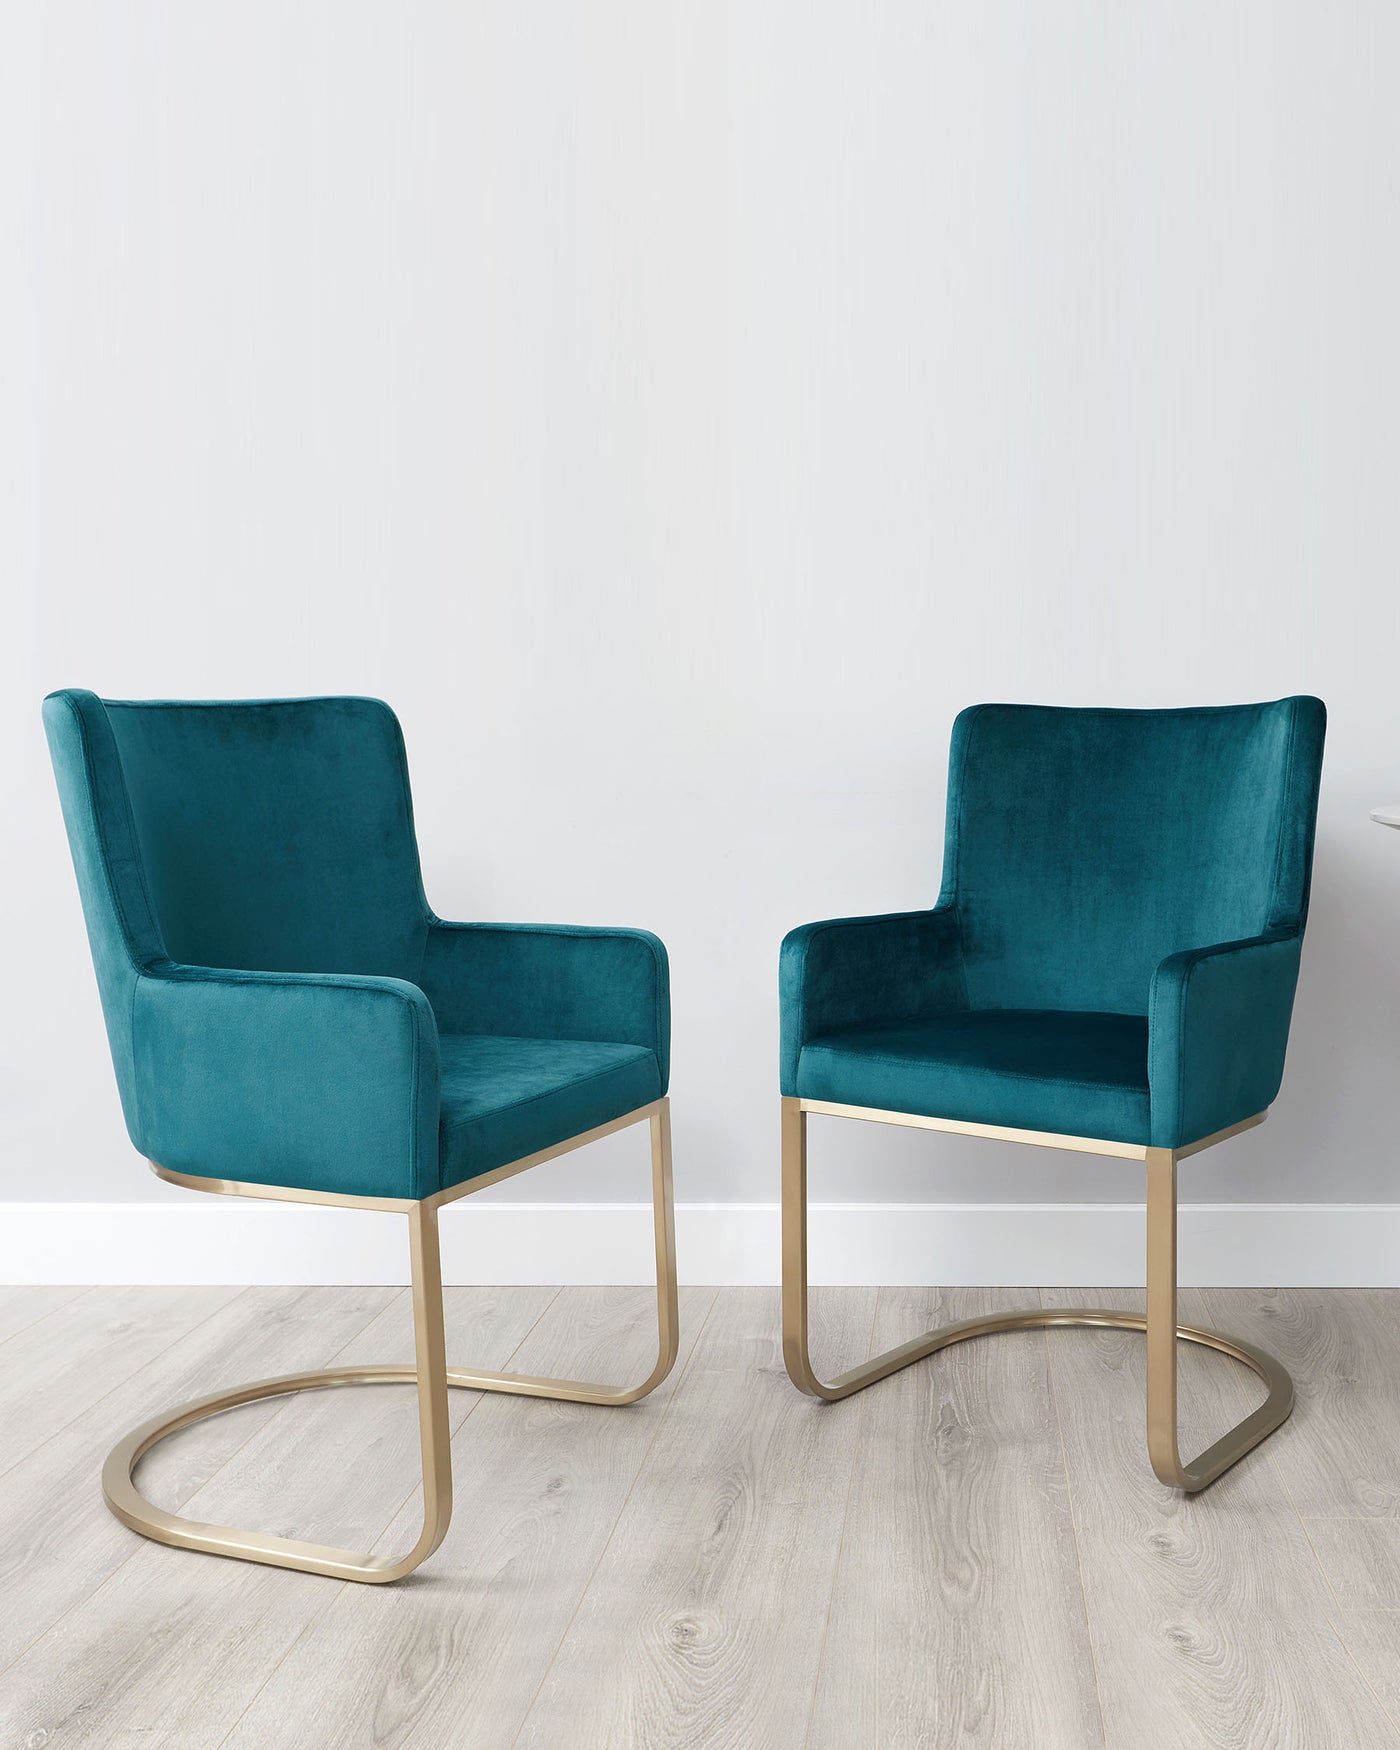 Two modern accent chairs with plush teal velvet upholstery and sleek gold-finished metal legs, set on a light hardwood floor against a white wall.